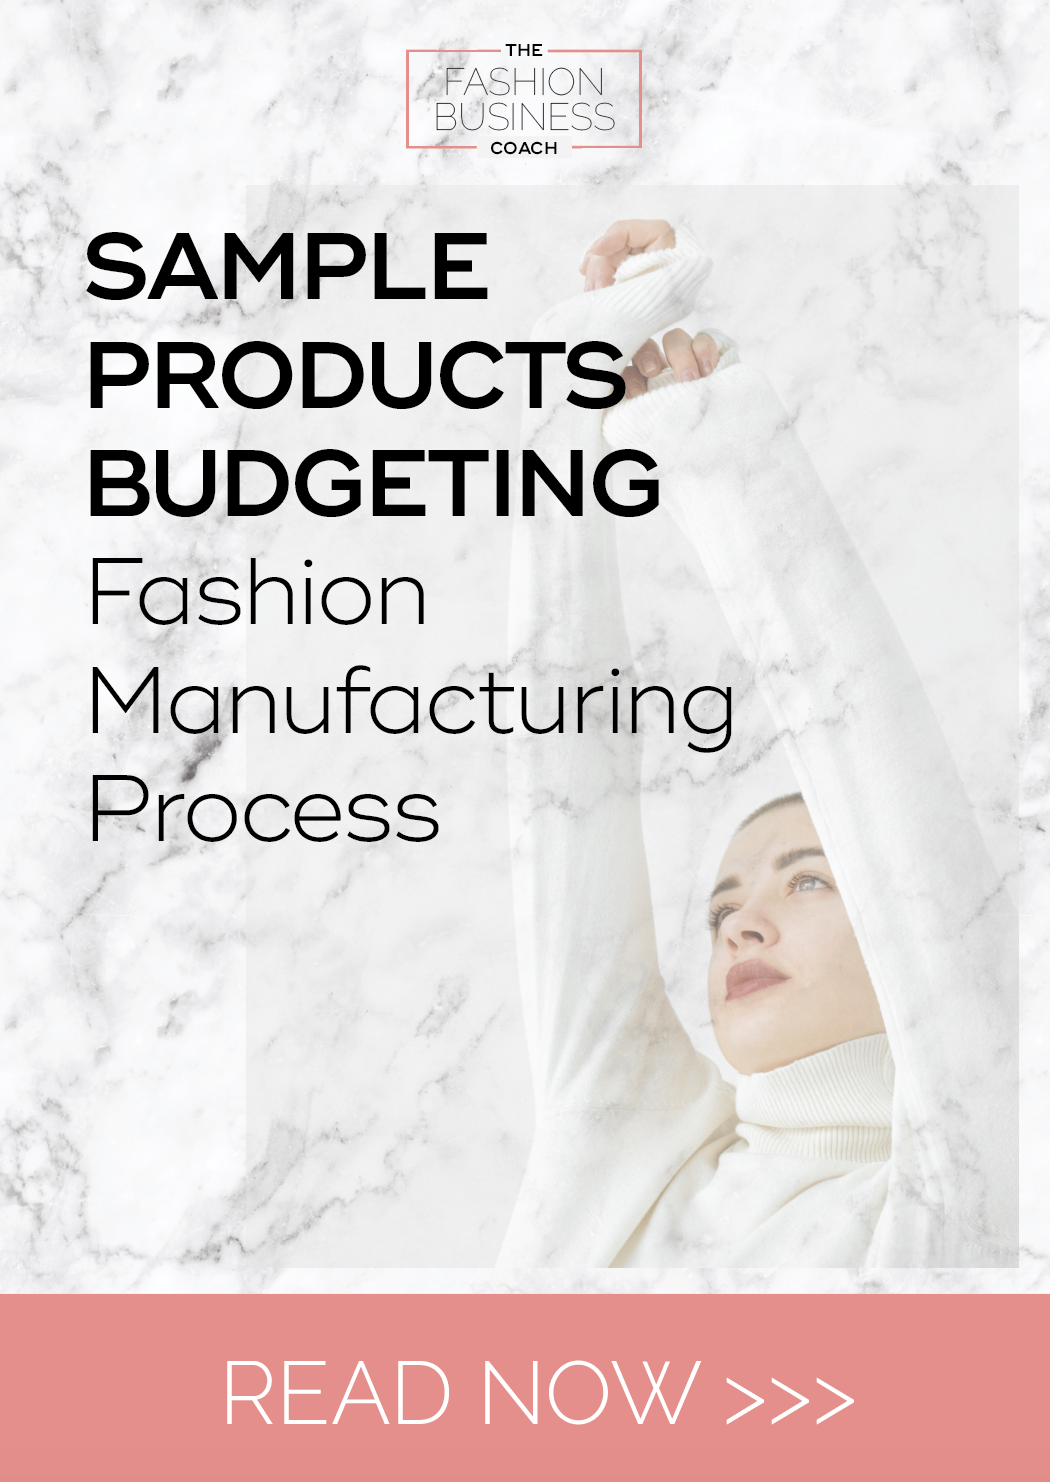 Sample Products Budgeting – Fashion Manufacturing Process 1.png